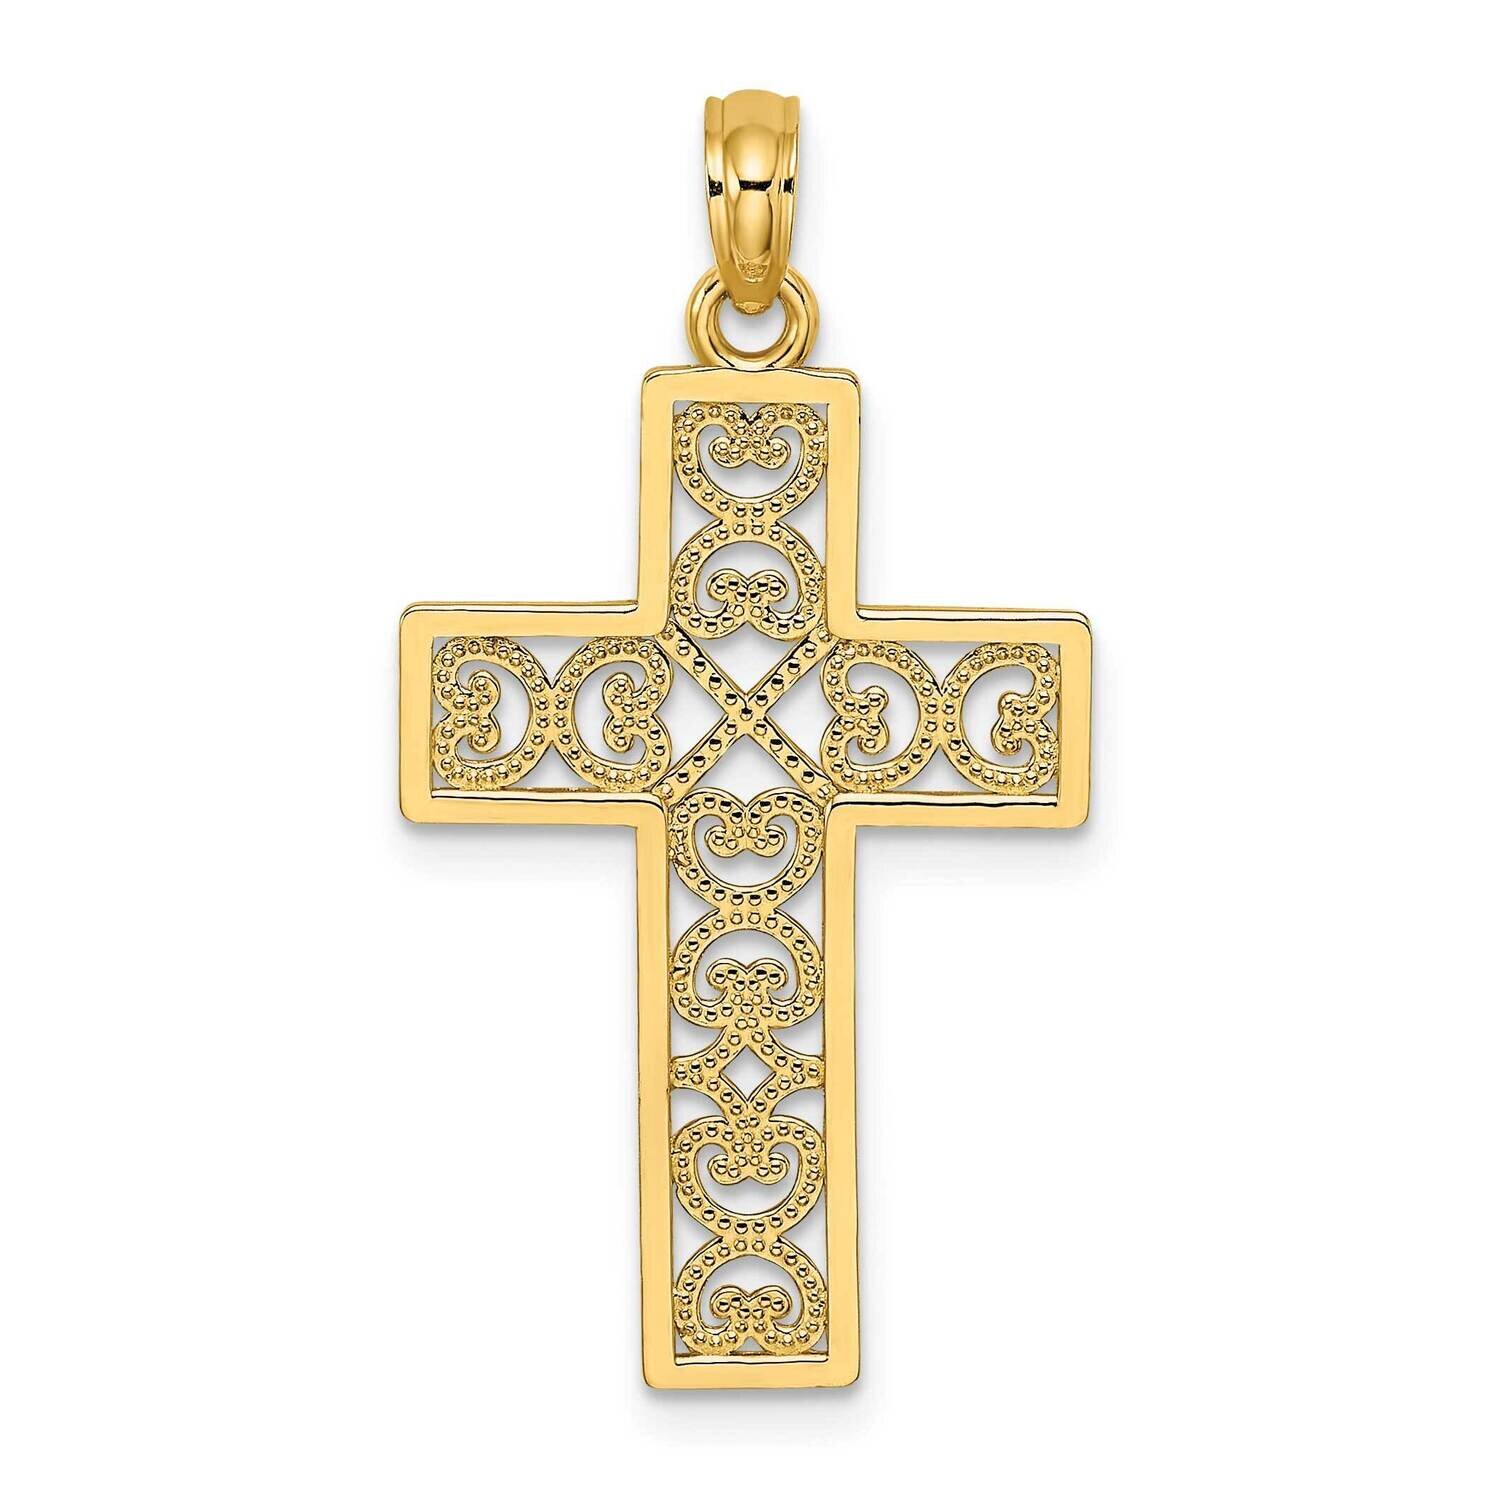 Sqaure Cross with Heart Design Charm 14k Gold Polished K8511